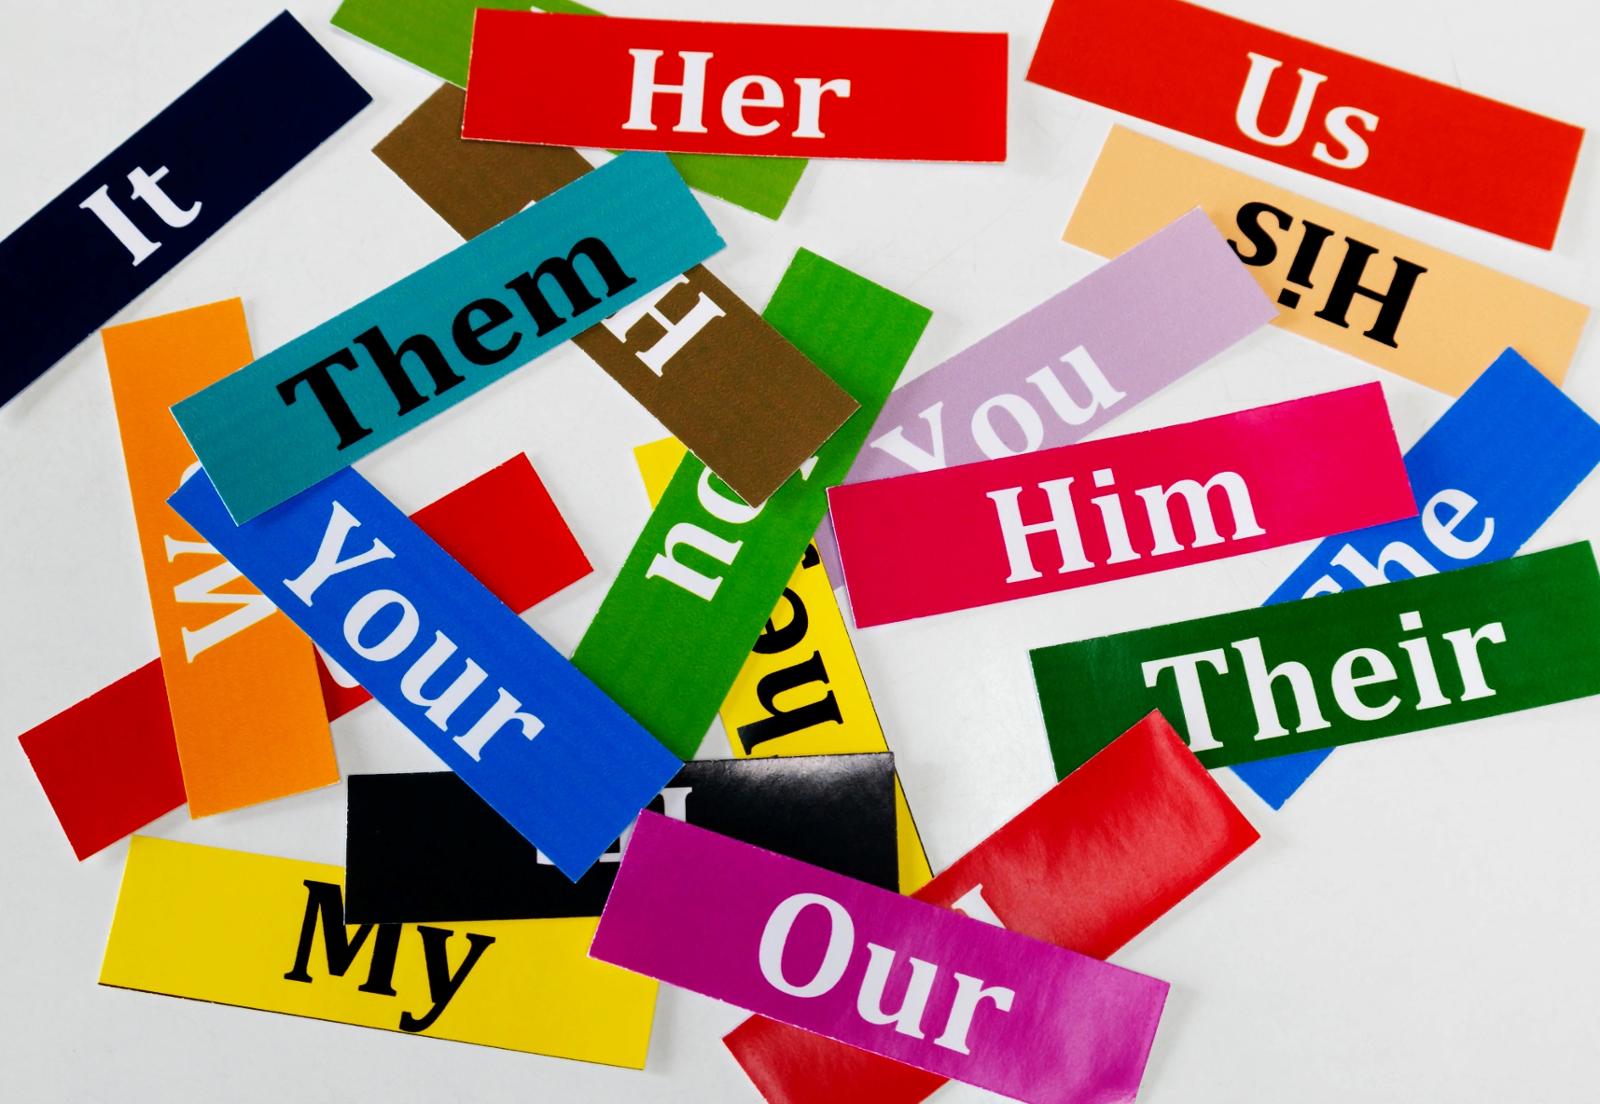 Collection of pronouns on colored pieces of paper.